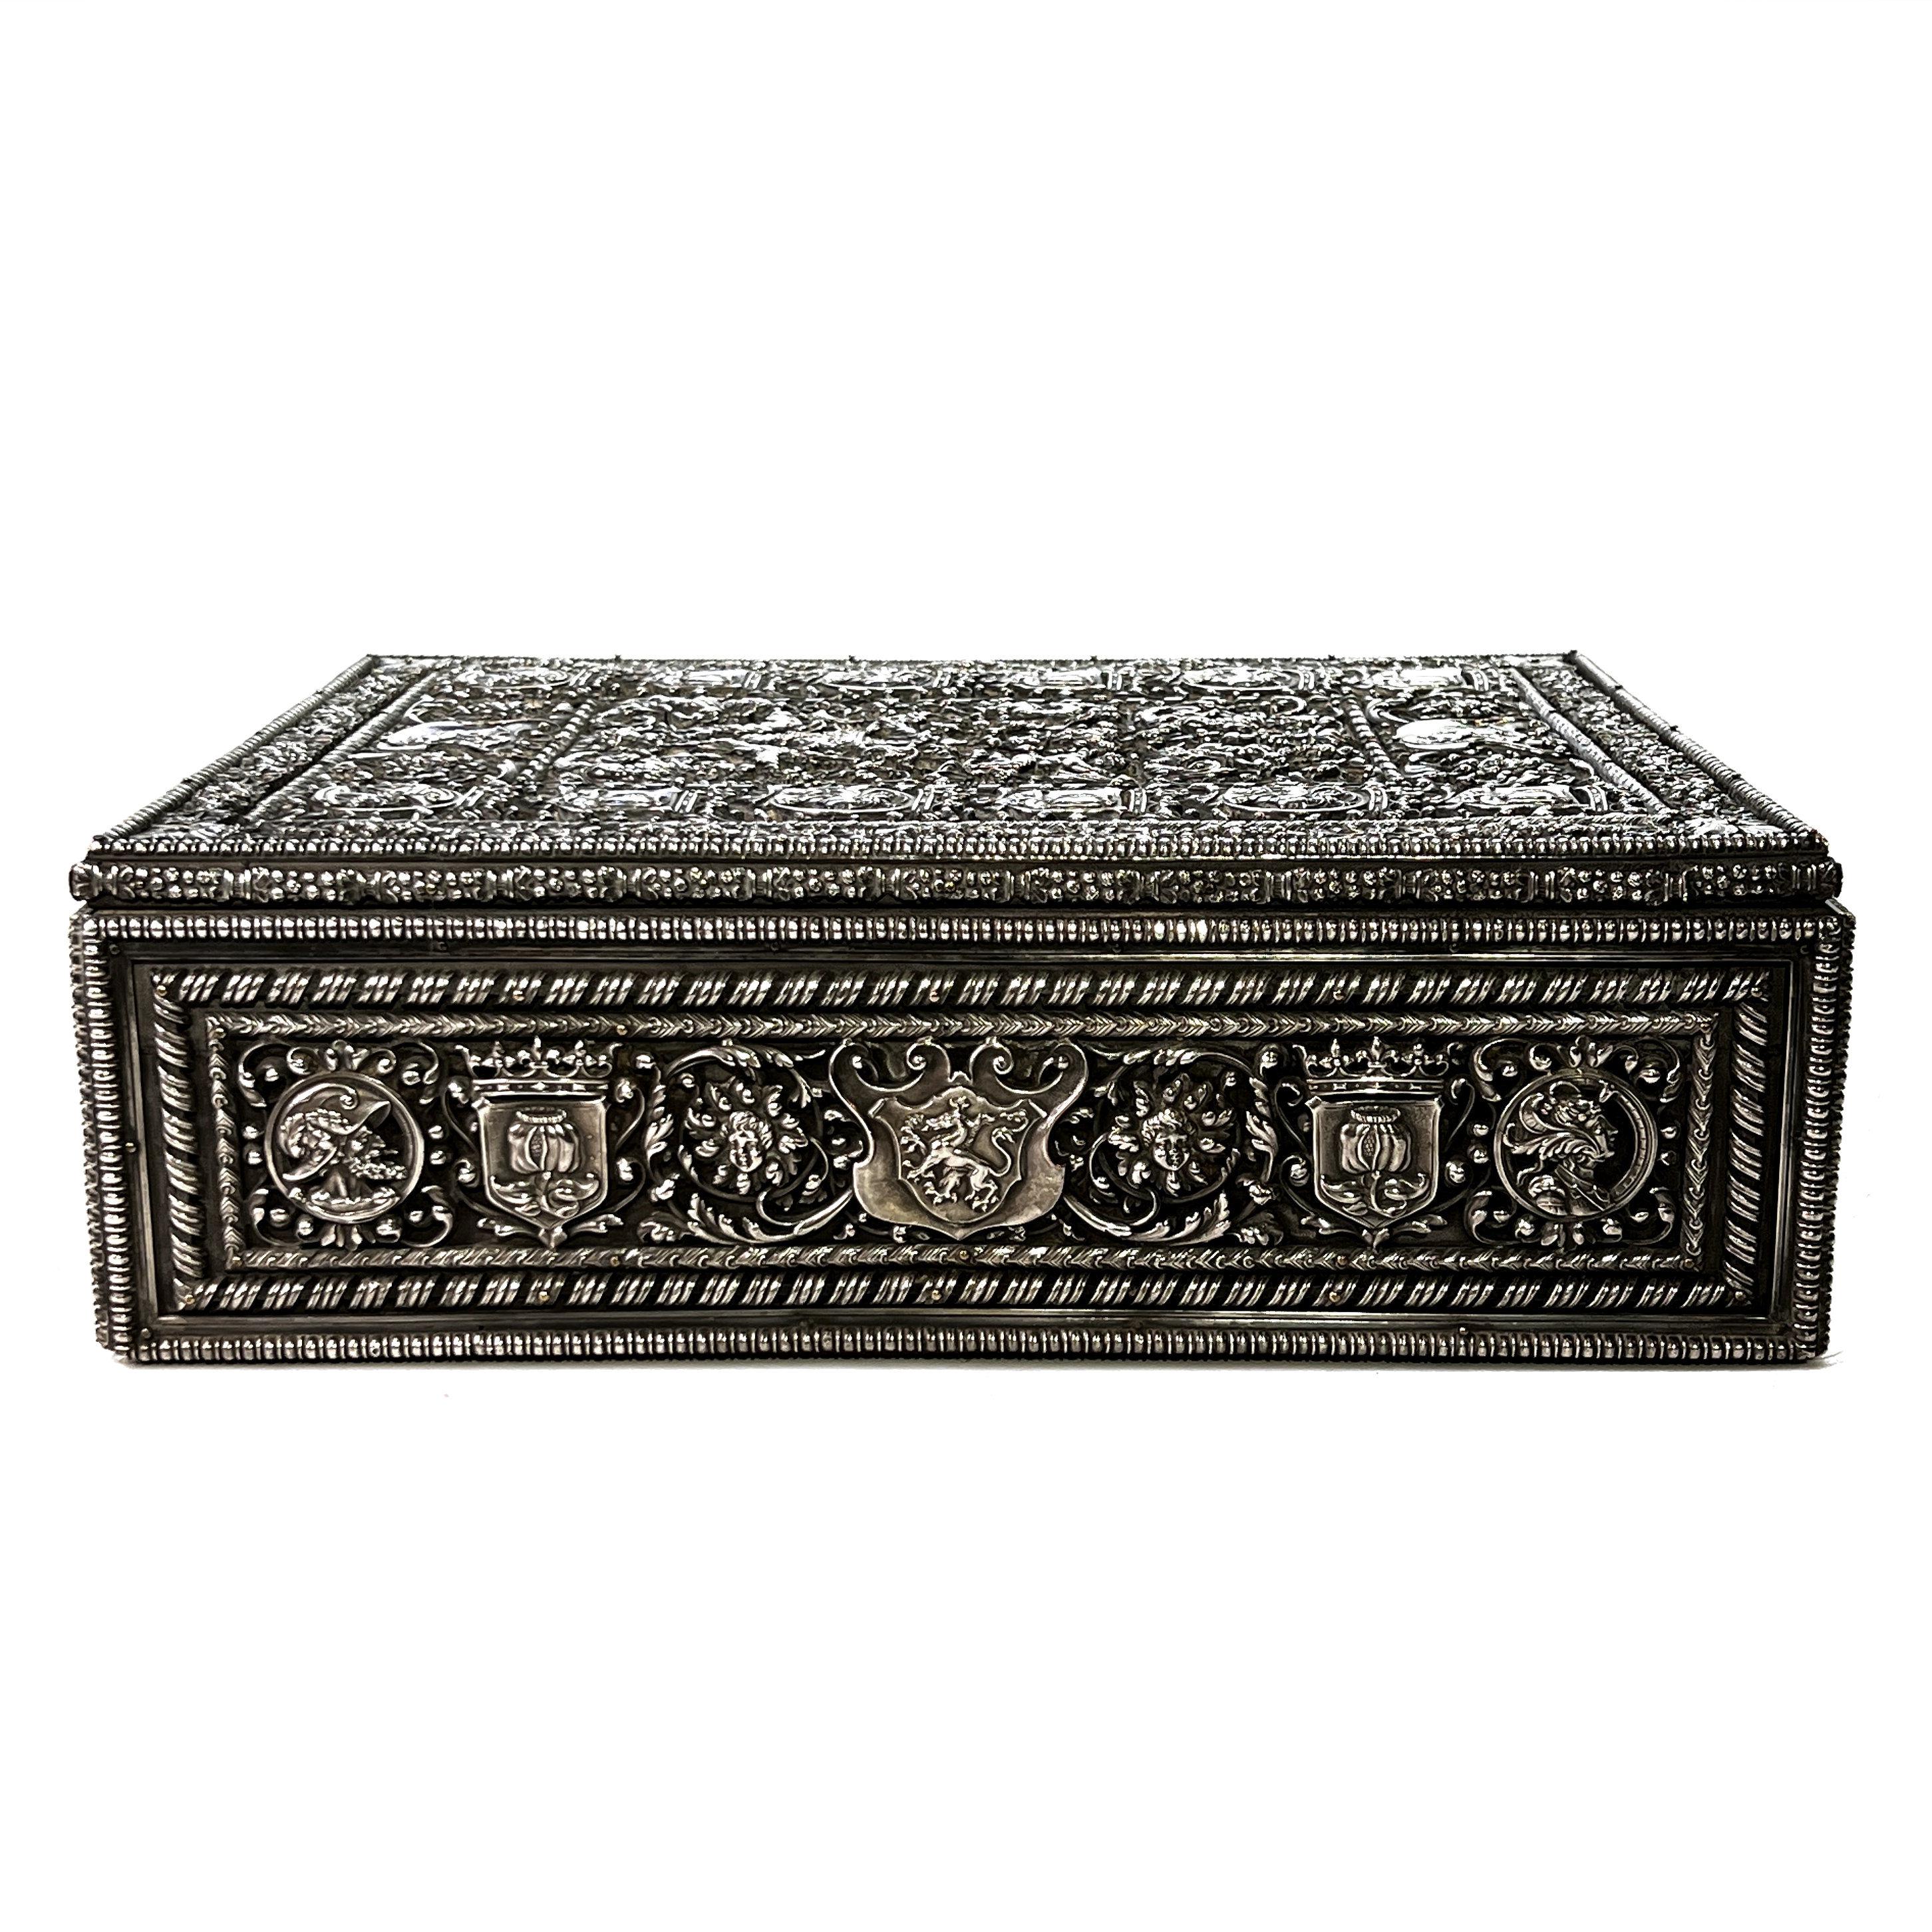 Metal E.F. Caldwell Silverplated Humidor Box in Renaissance Style